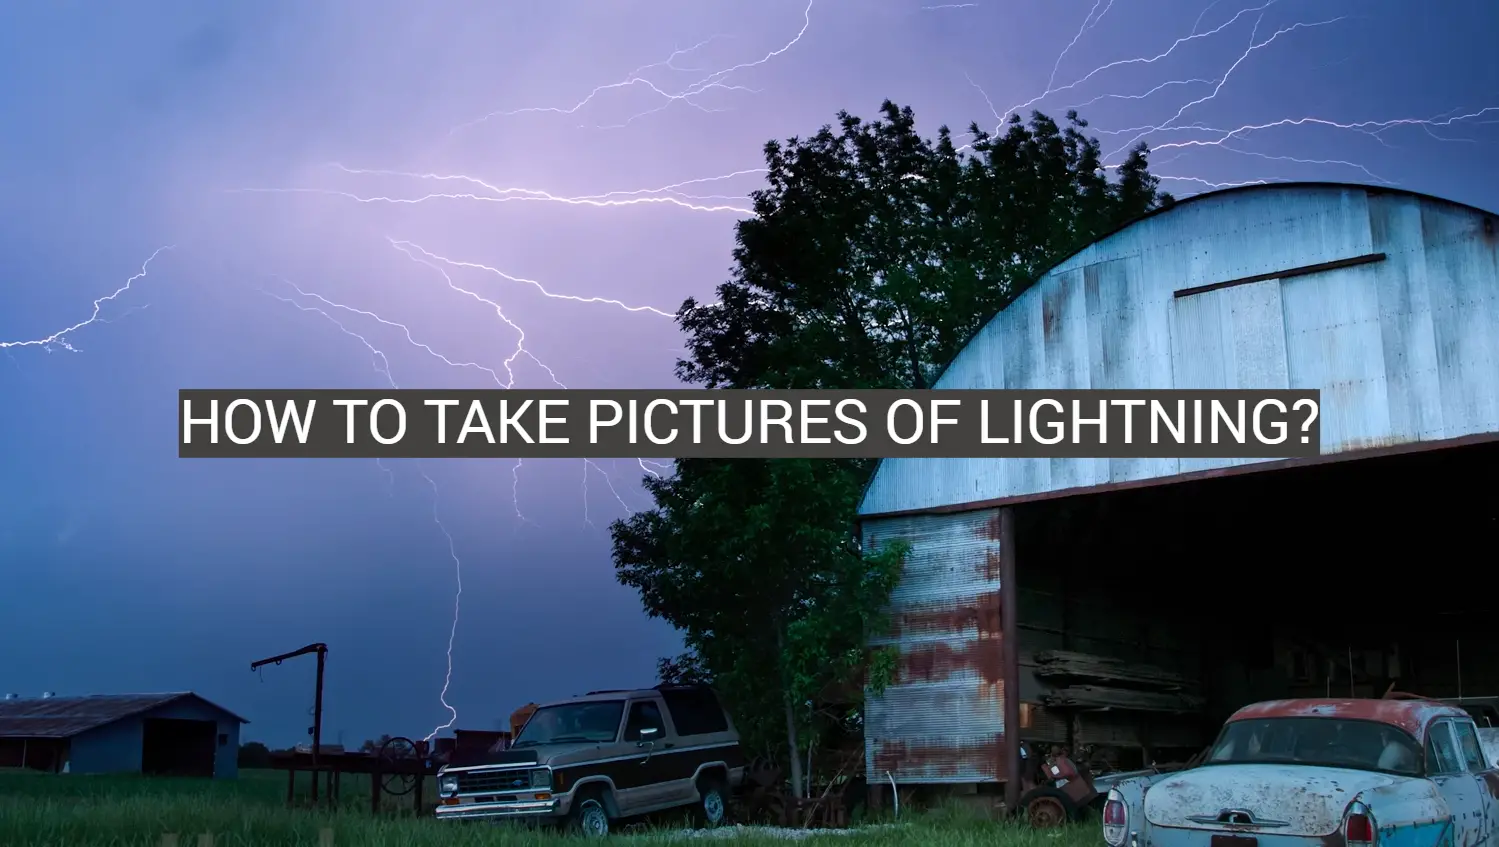 How to Take Pictures of Lightning?